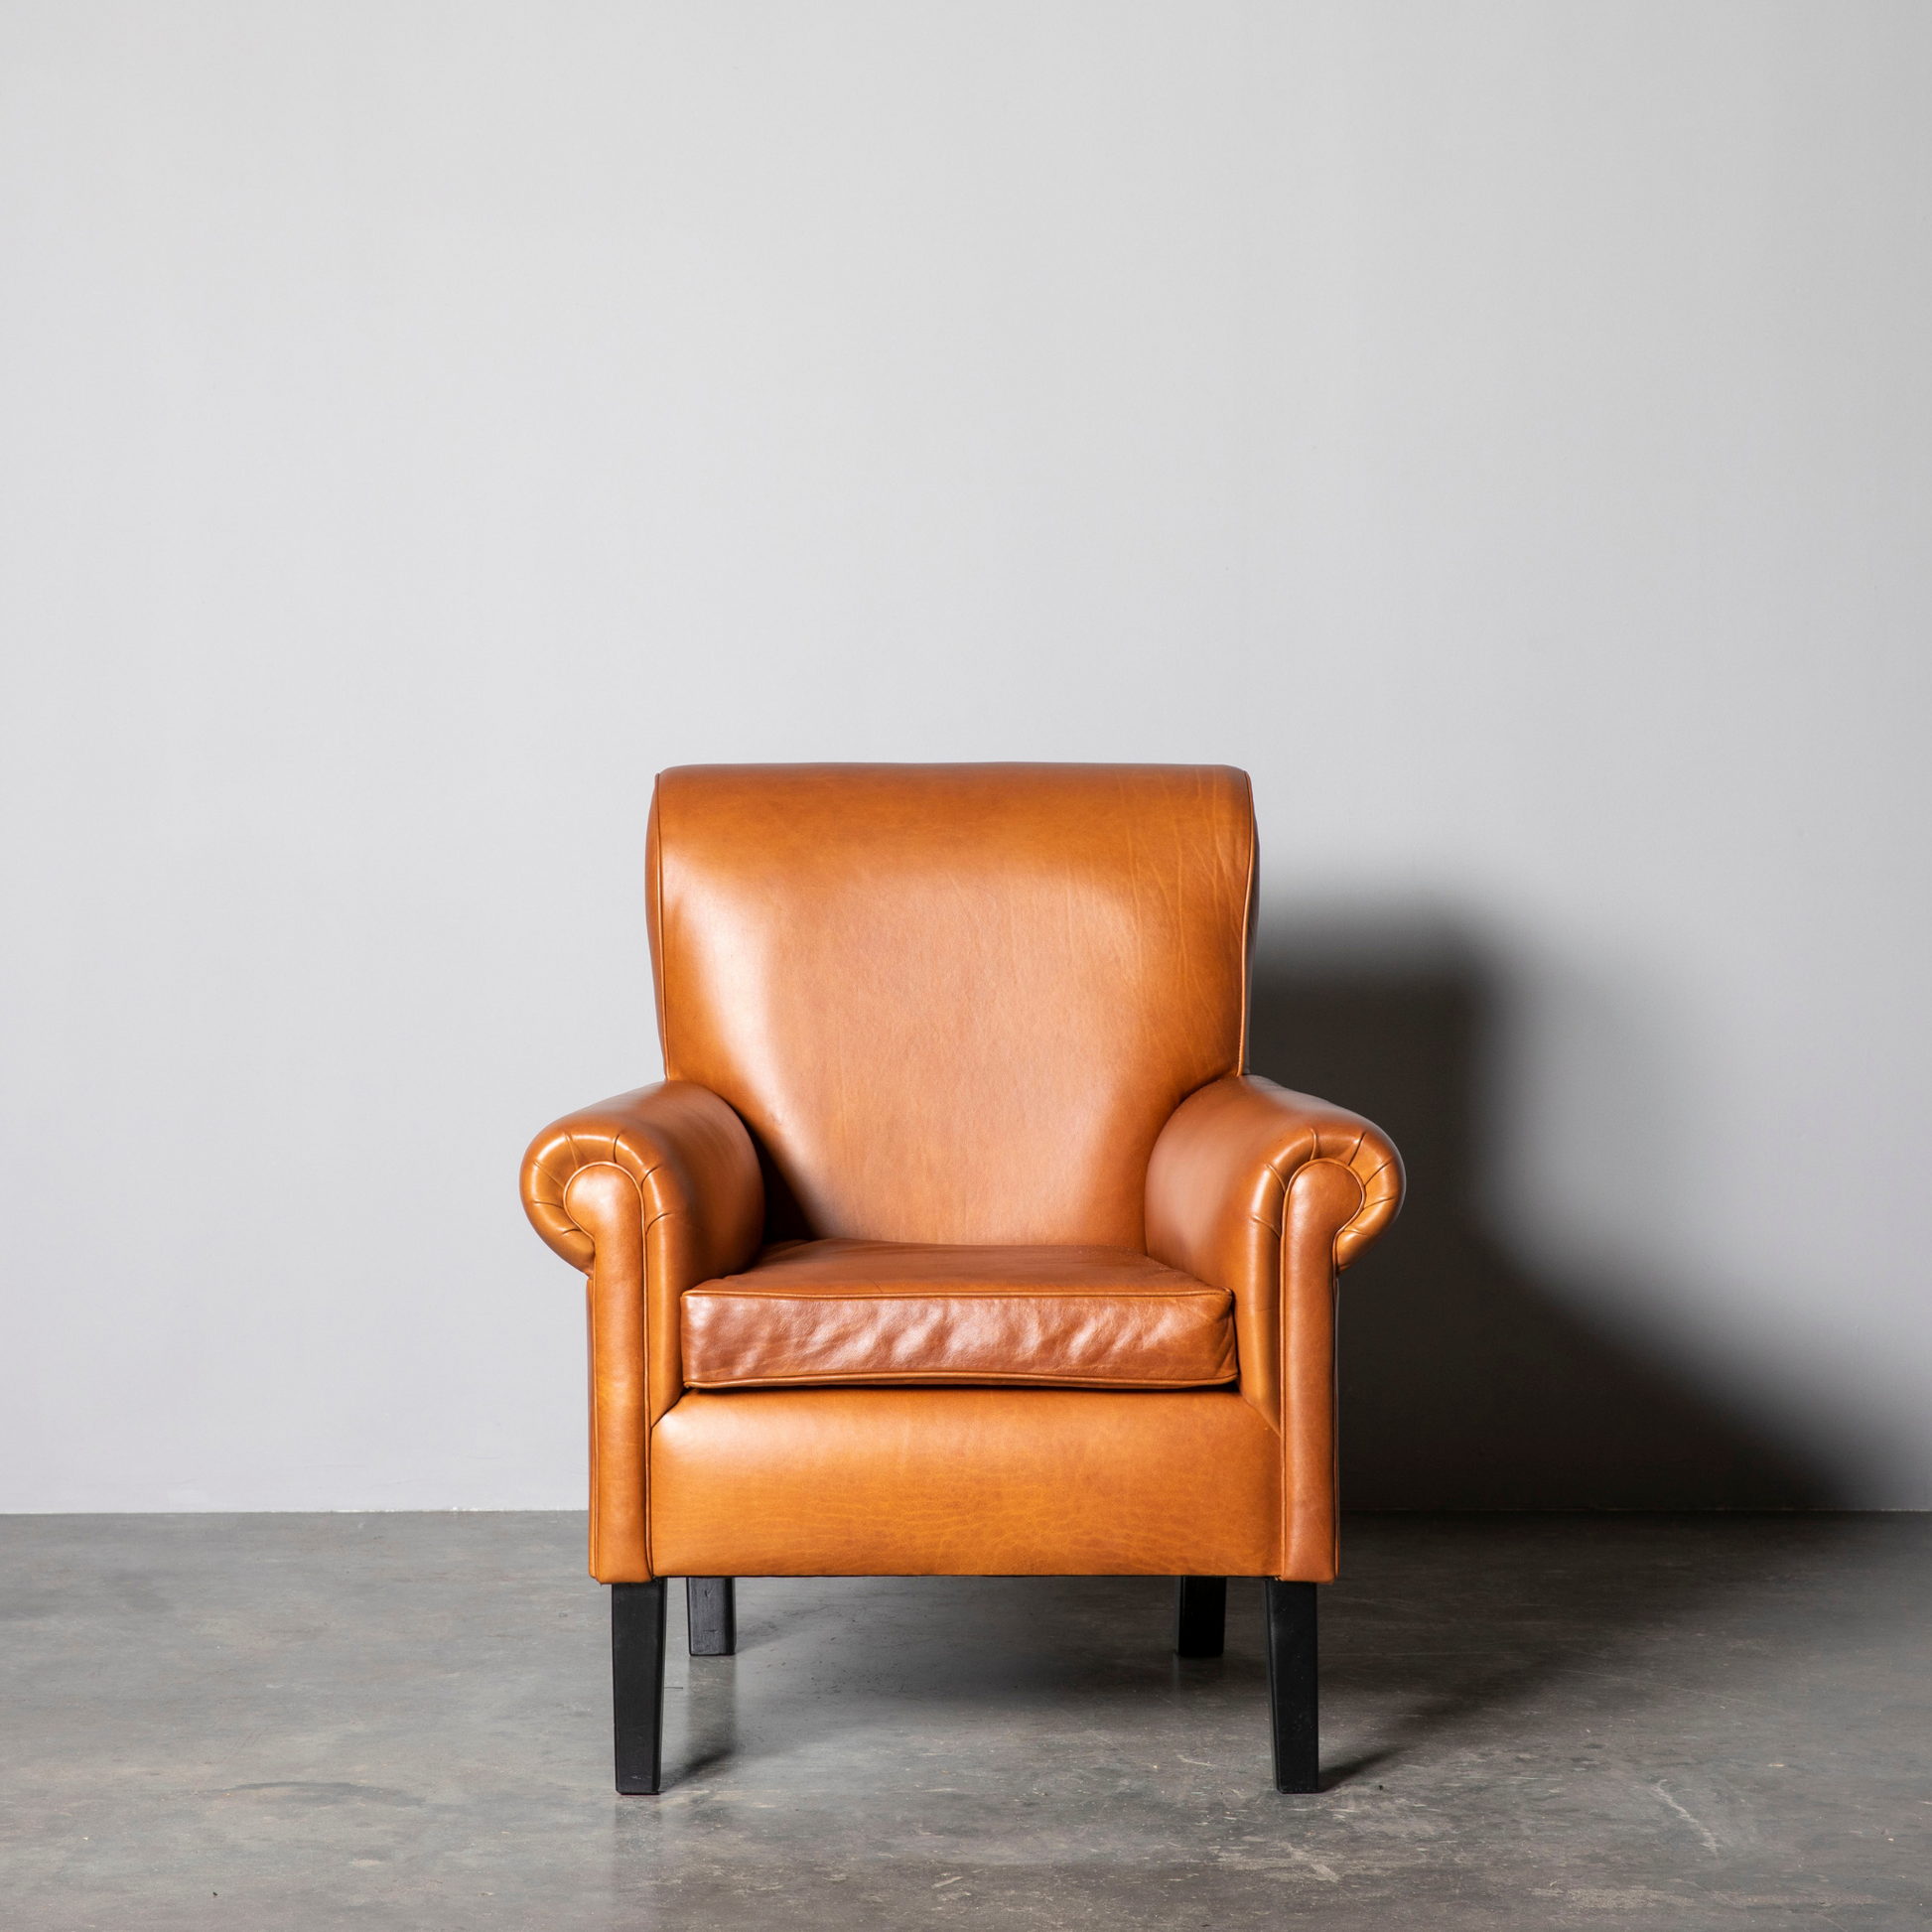 Karoo Armchair – A comfortable classic armchair designed to enhance any space. Experience timeless elegance and comfort with the Karoo Armchair, a versatile addition to your home.